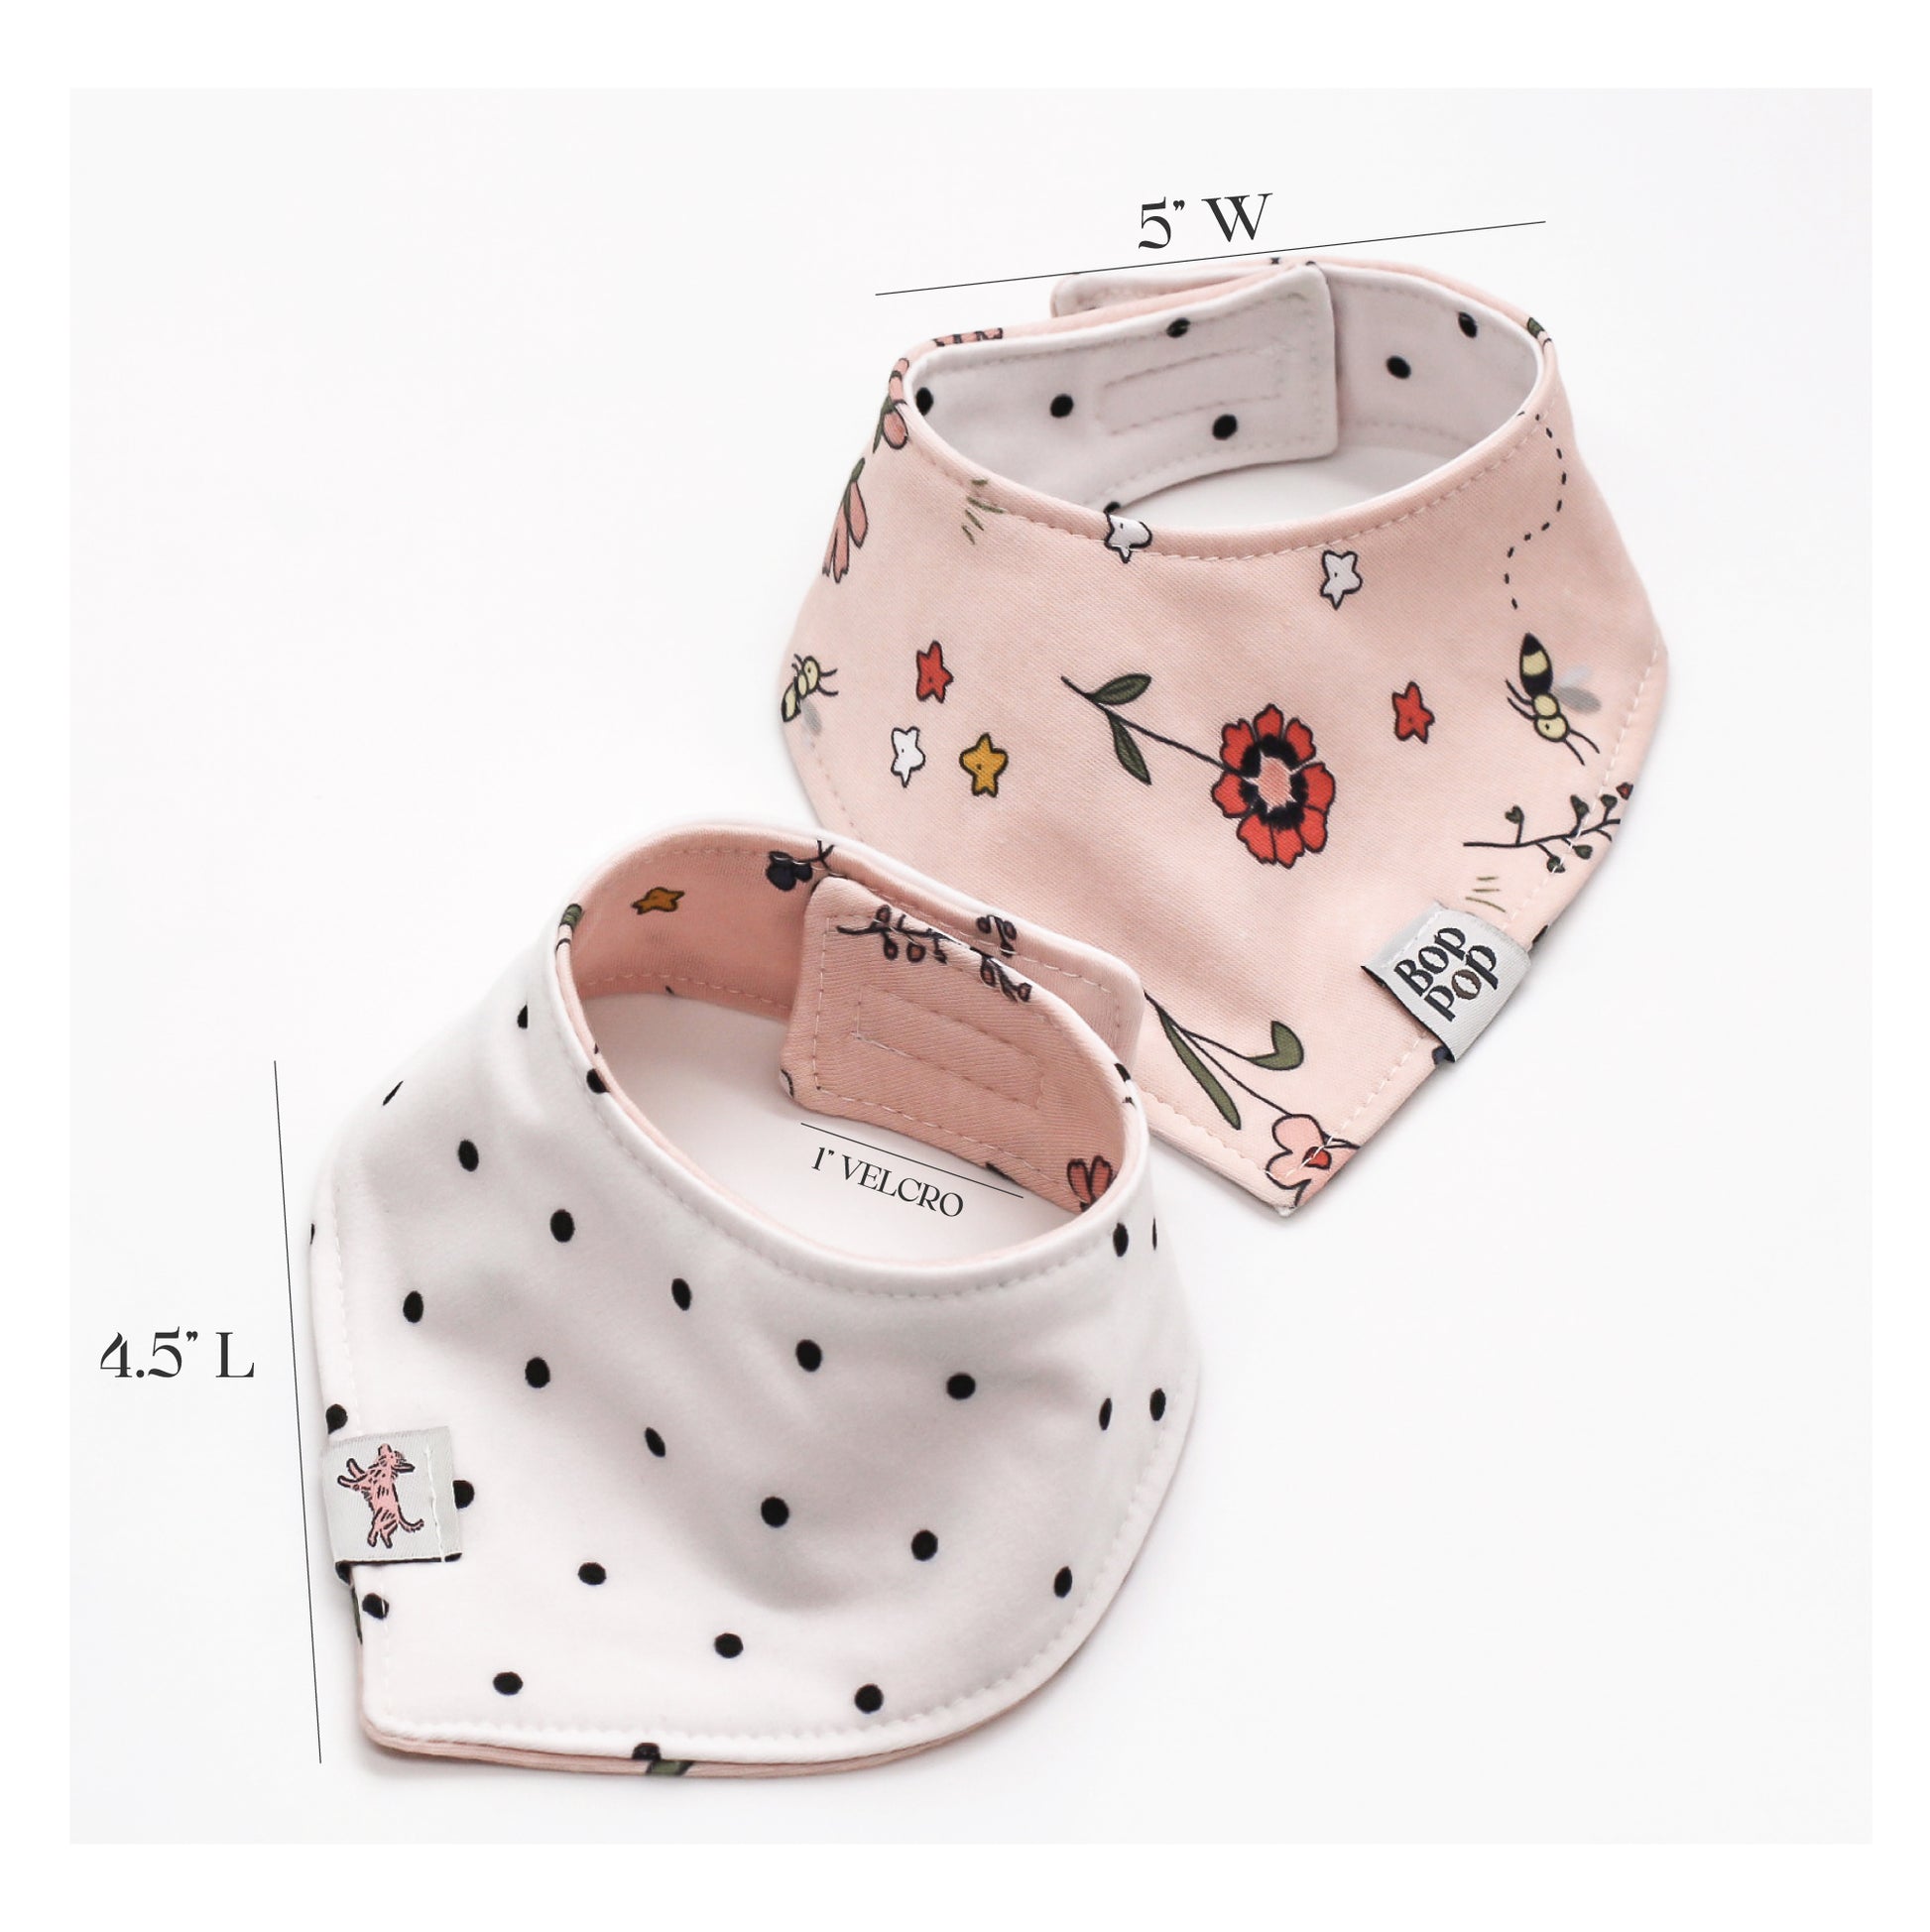 Pink polka dot cozy cotton jersey cat small dog bandanas with velcro Flower Bees pet accessory bop pop pets Reversible 2-sided print sizing